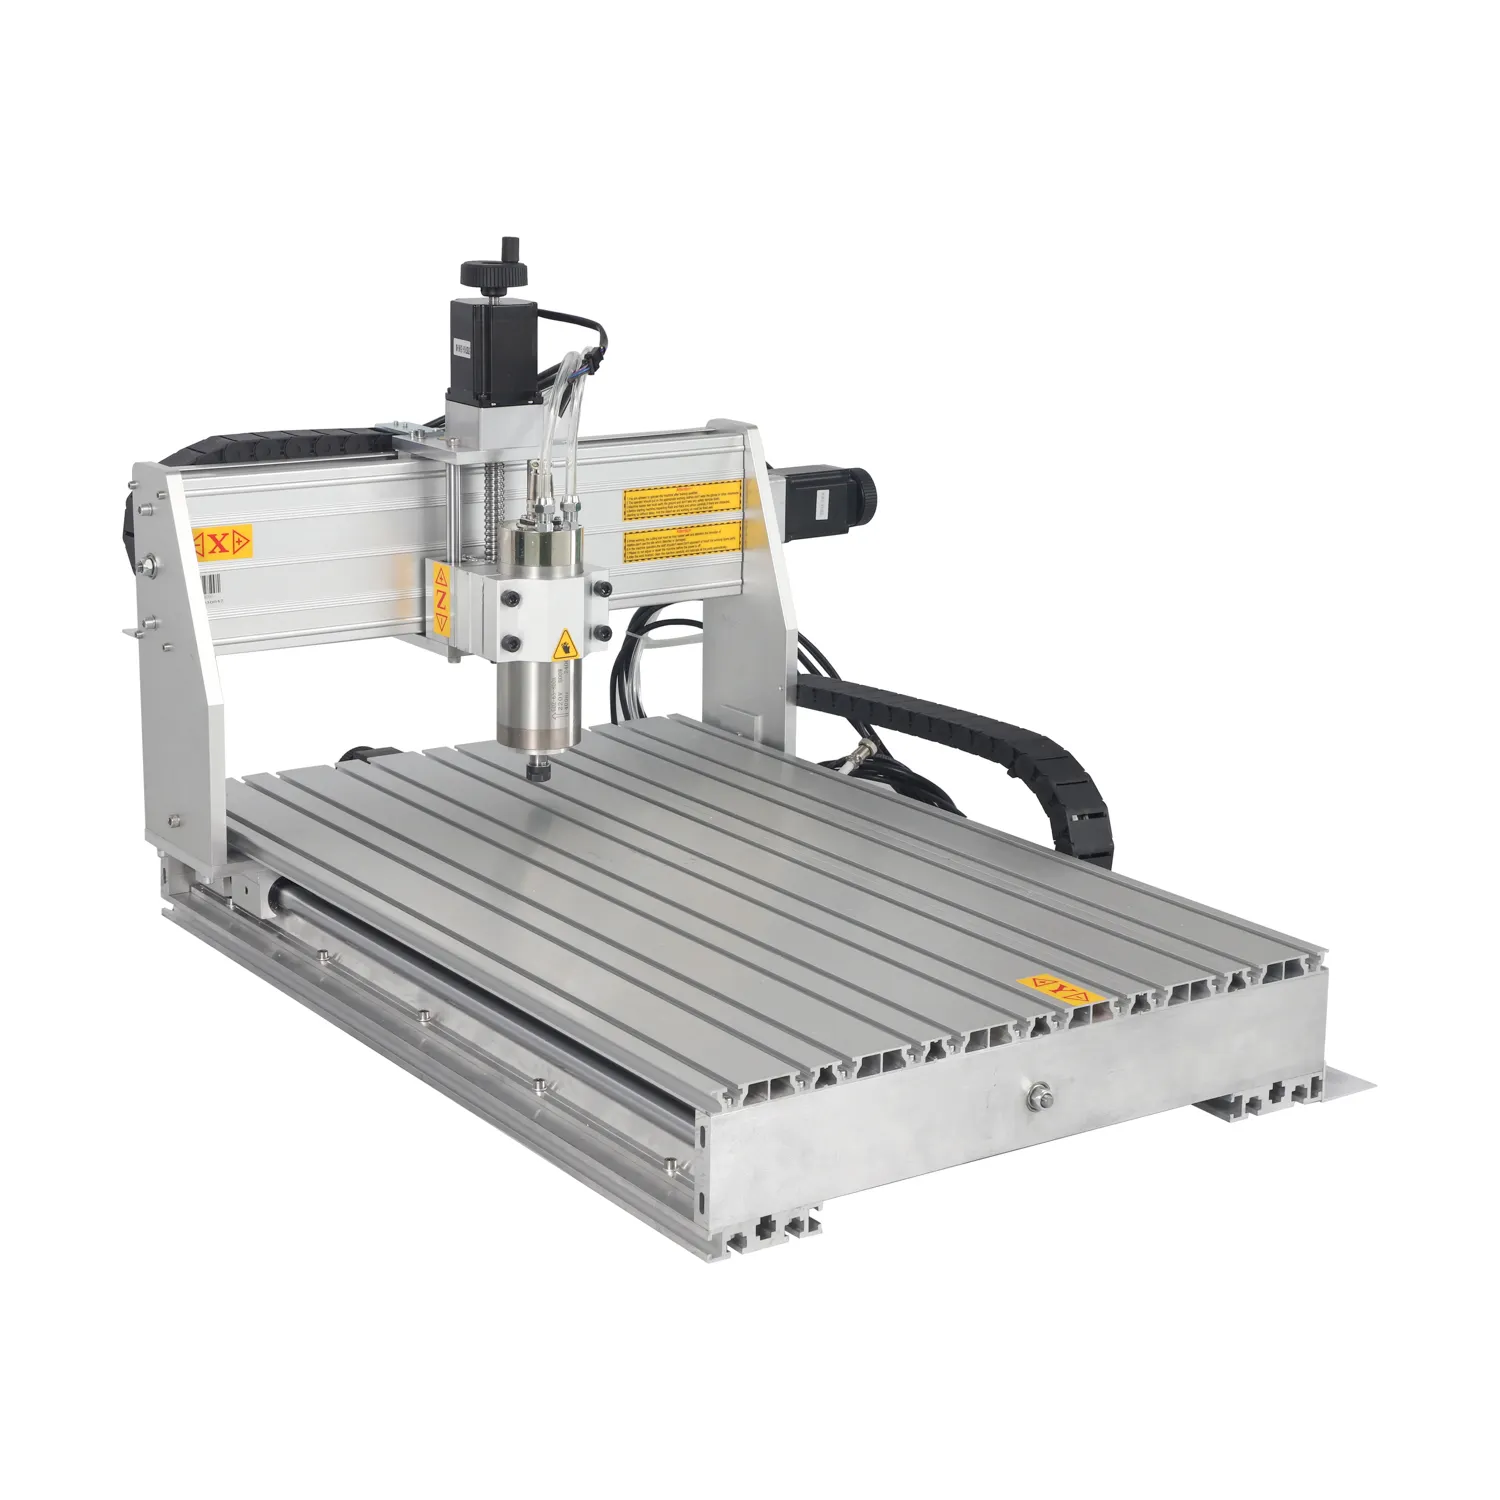 4 Axis 2030 3040 4060 6090 wood cnc router/ wood cutting machine/cnc cut router